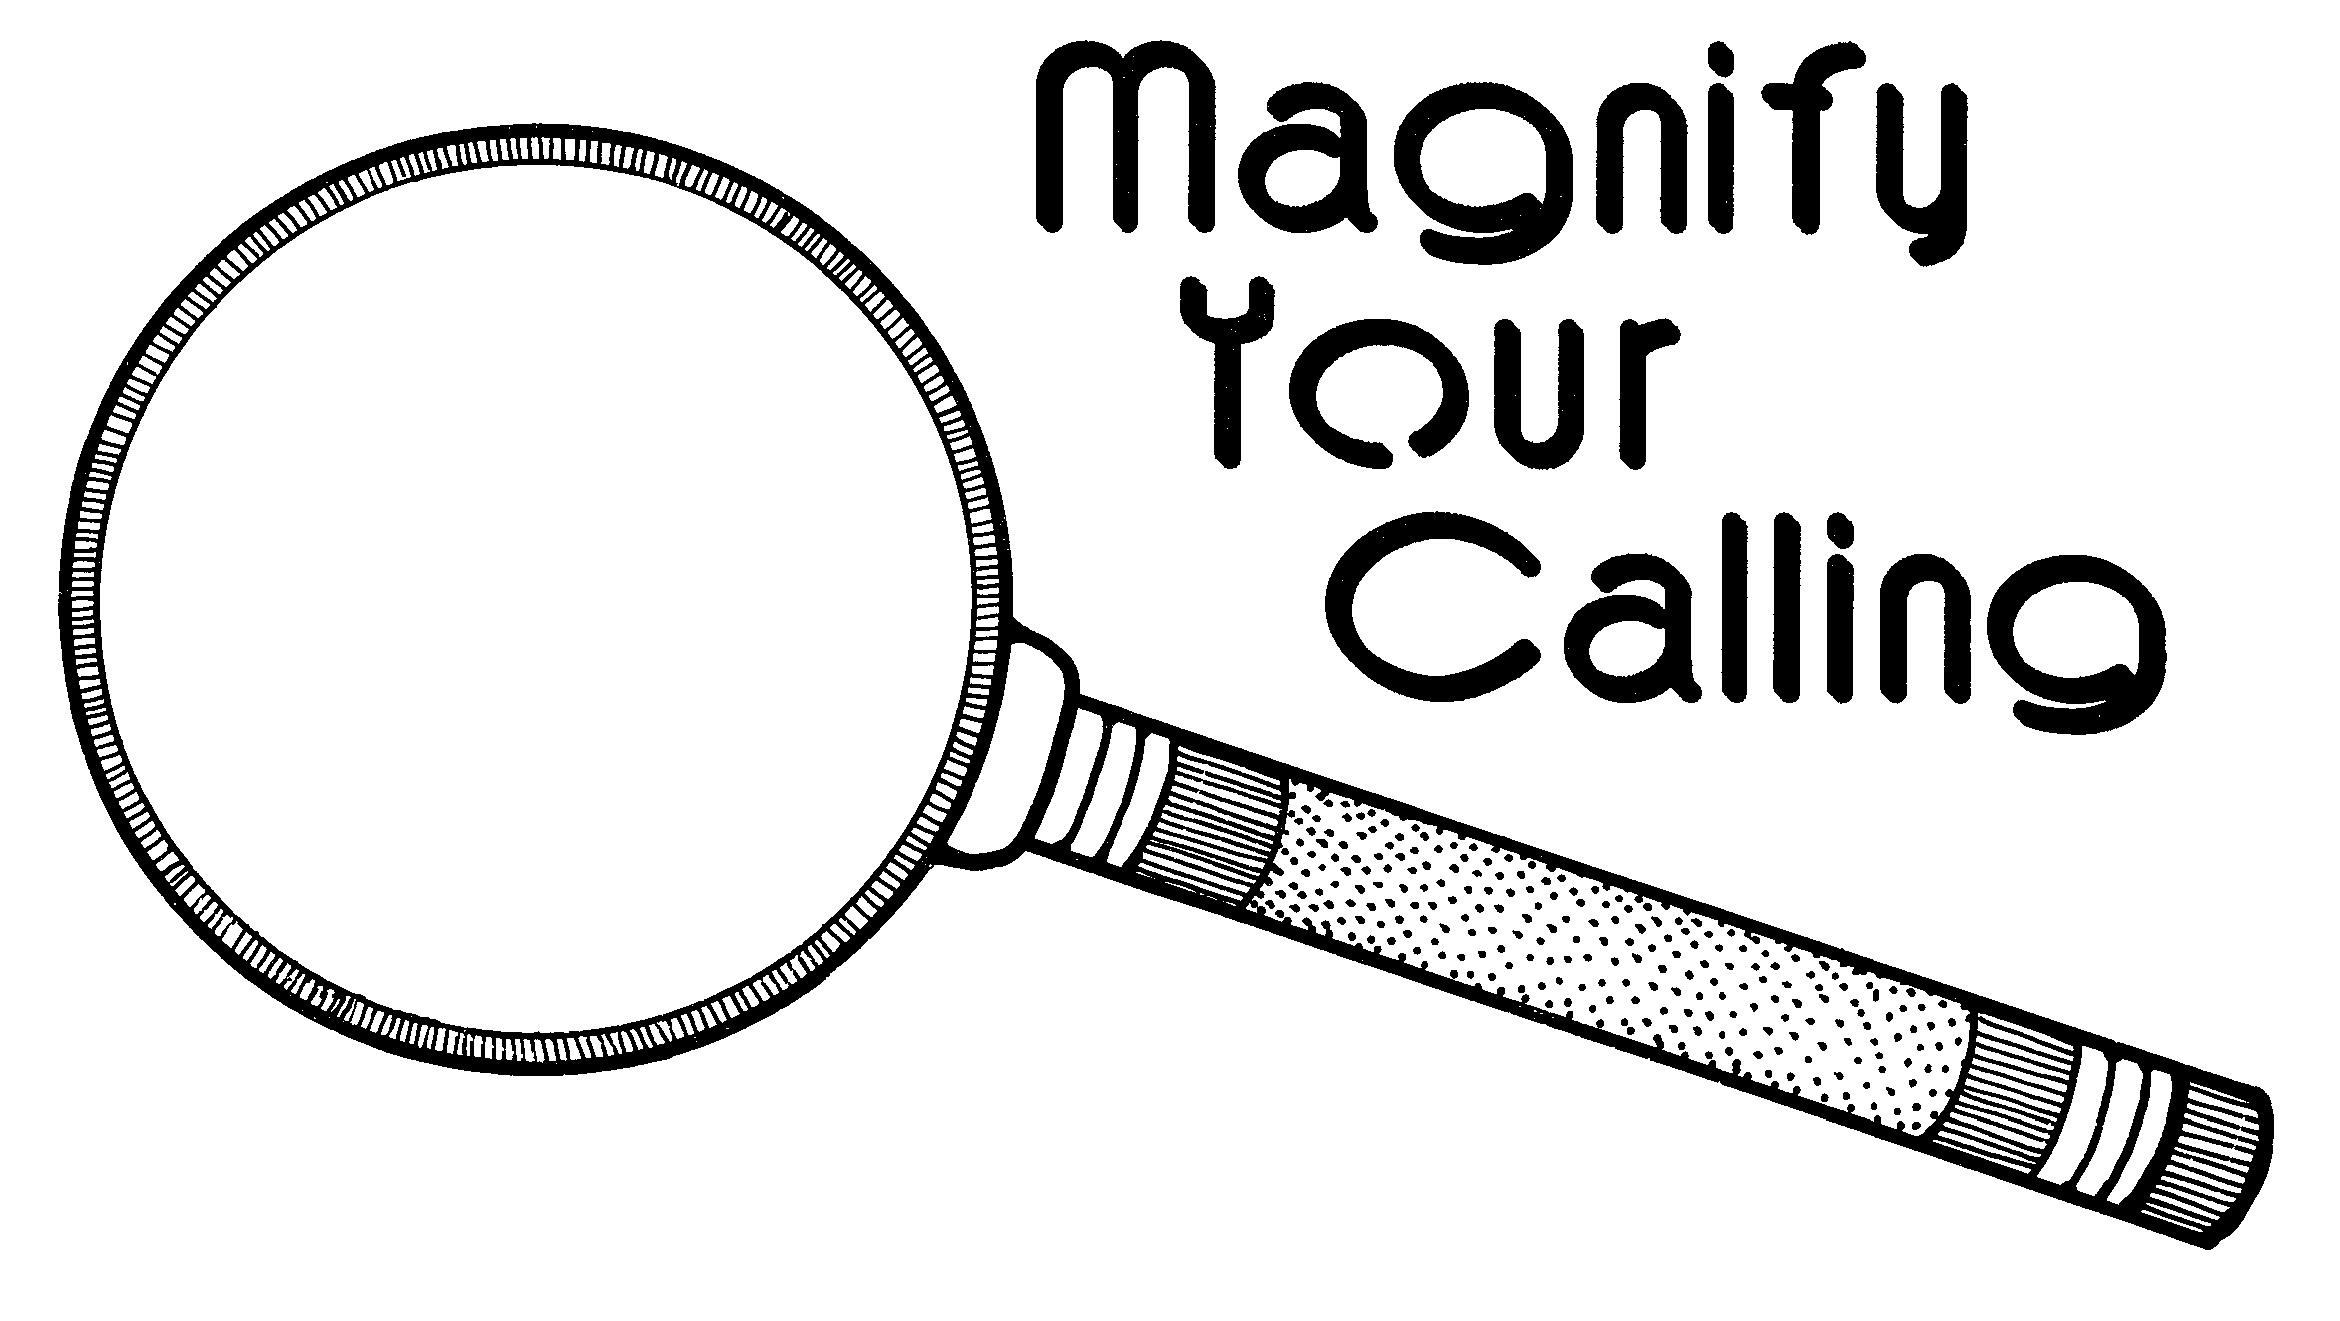 coloring picture of magnifying glass magnifying glass page coloring pages of magnifying picture coloring glass 